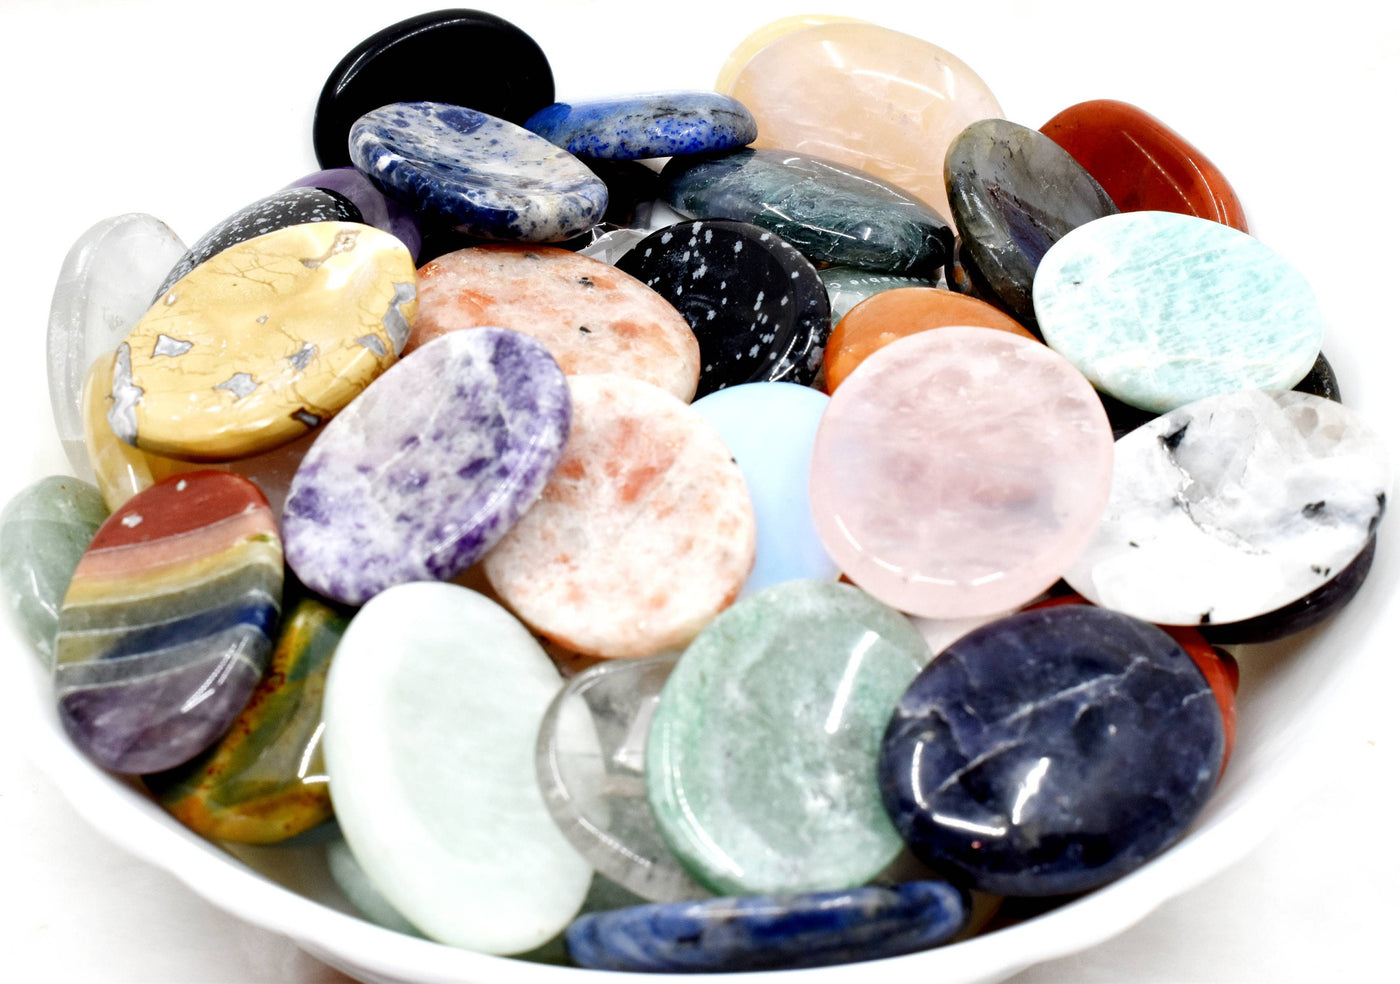 Wholesale Worry Stones Mix Lot 50 Bulk Worry Stones ~ Assorted Crystal for Anxiety Relief